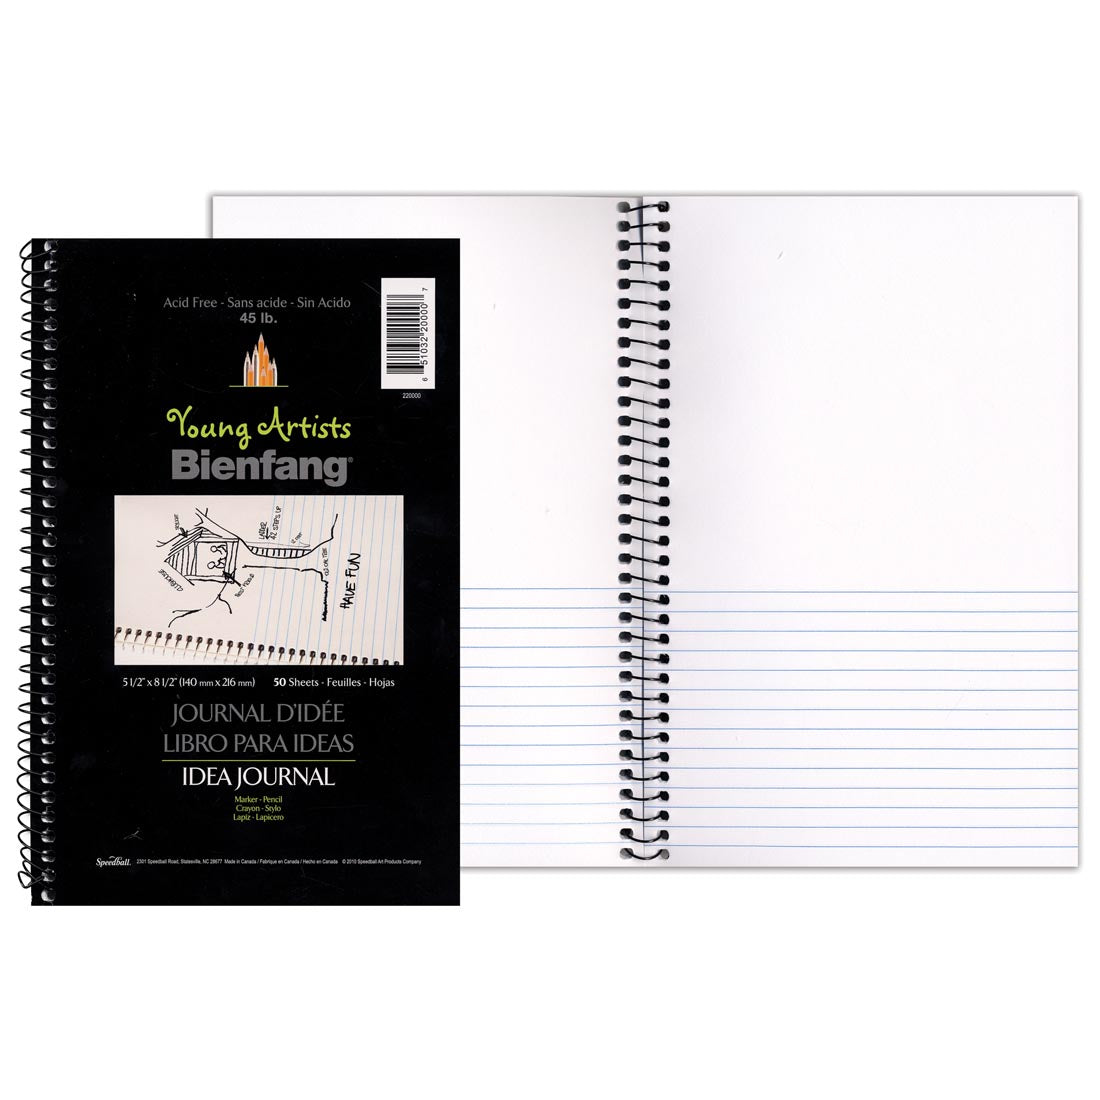 Speedball Mulberry Unbleached Printmaking Paper 9 x 12 (25 Sheets)